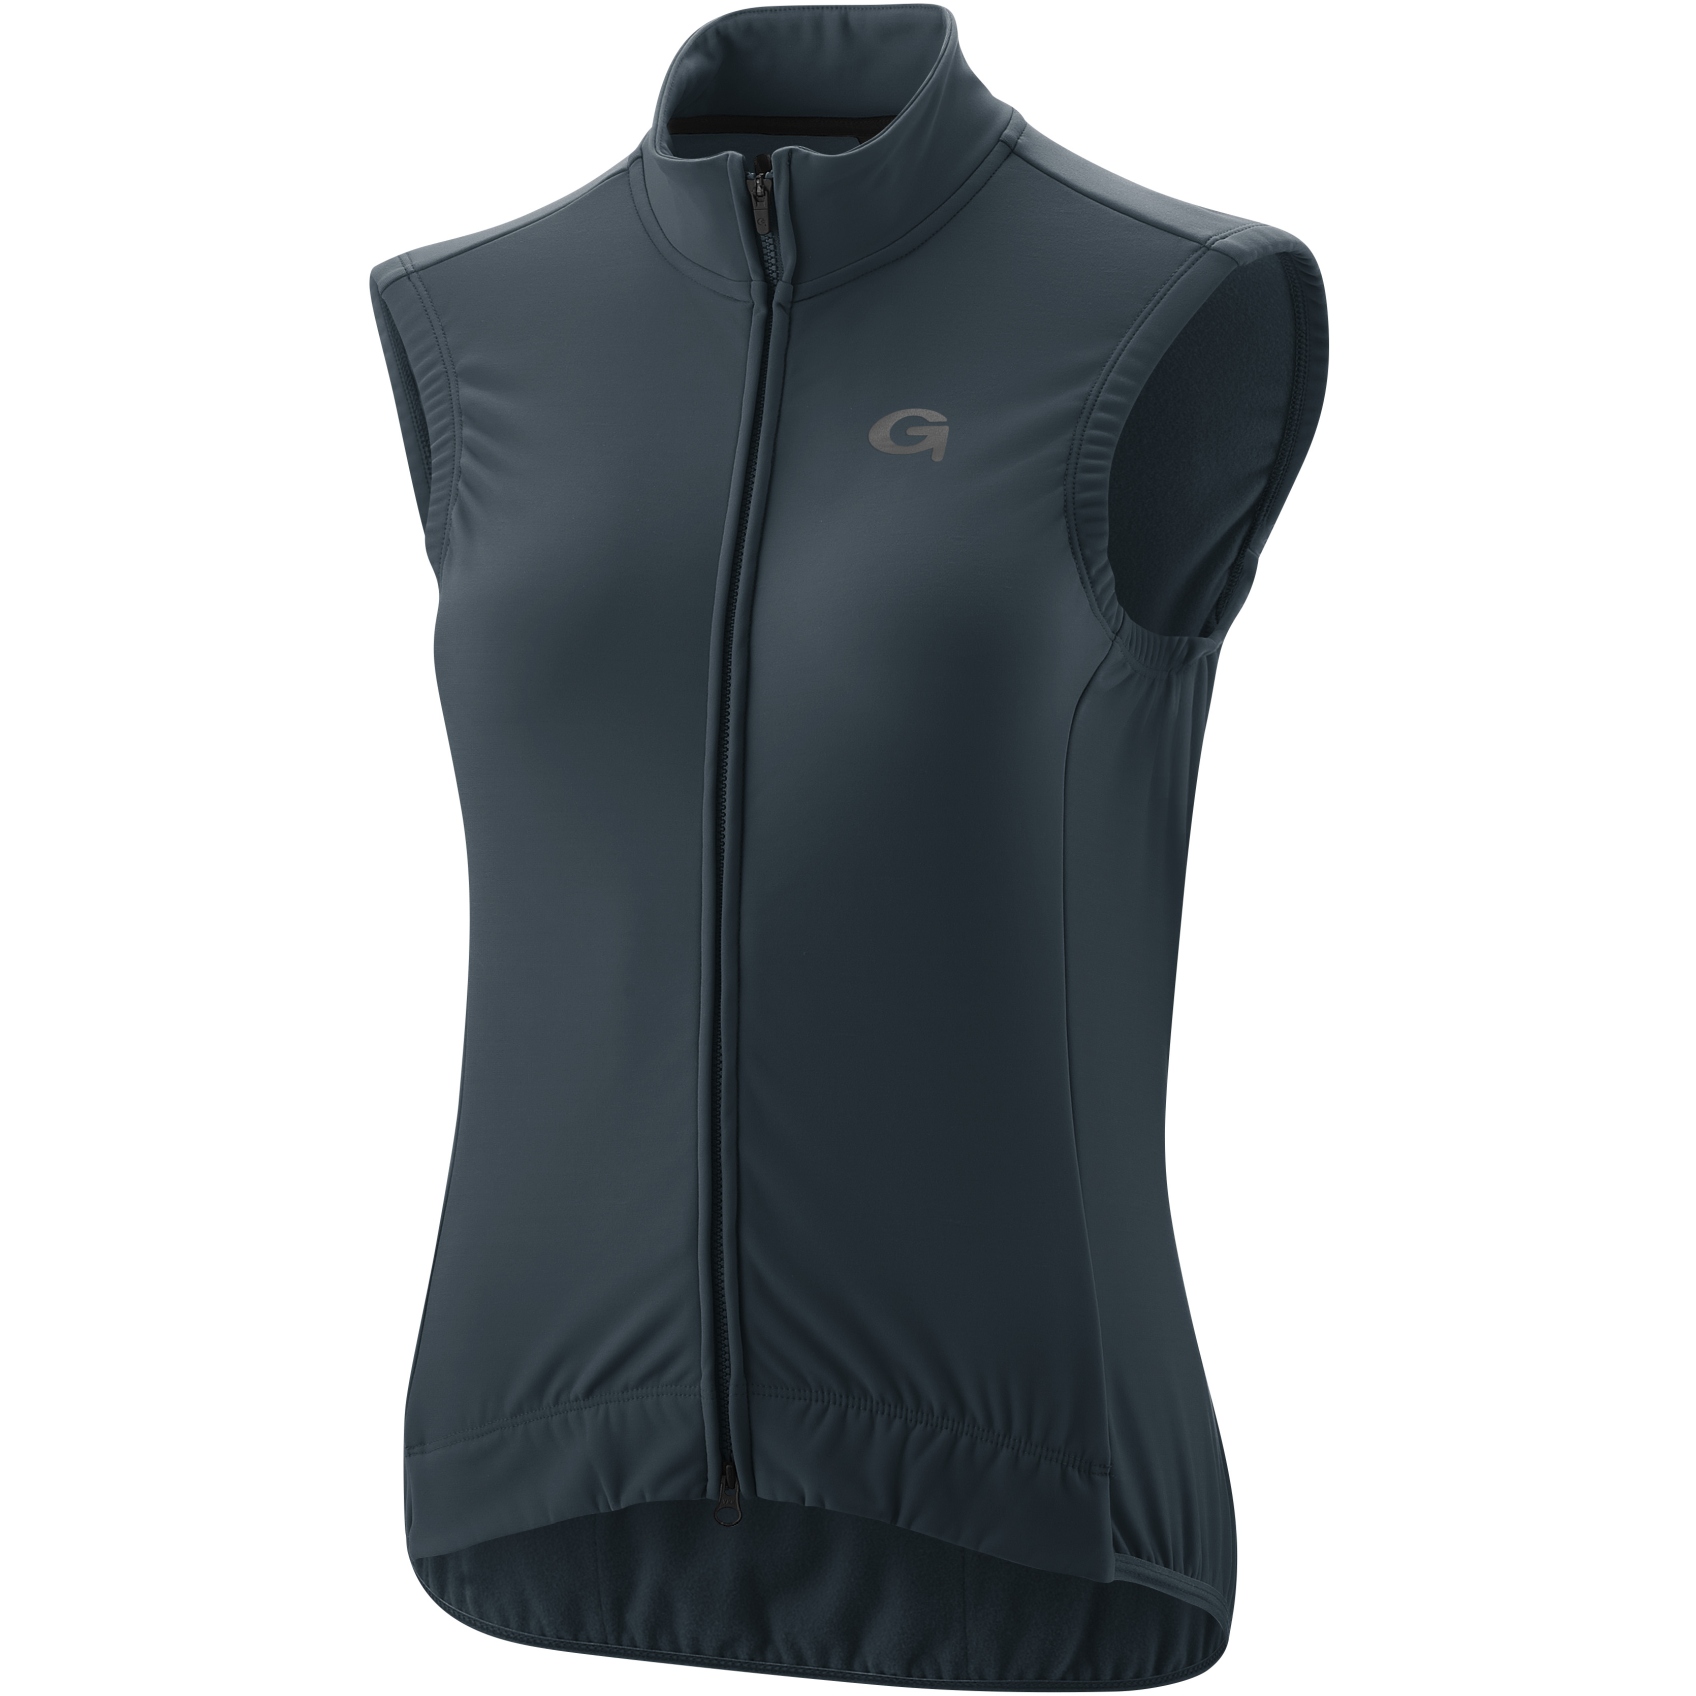 Productfoto van Gonso Road Therm Fietsvest Dames - Graphite